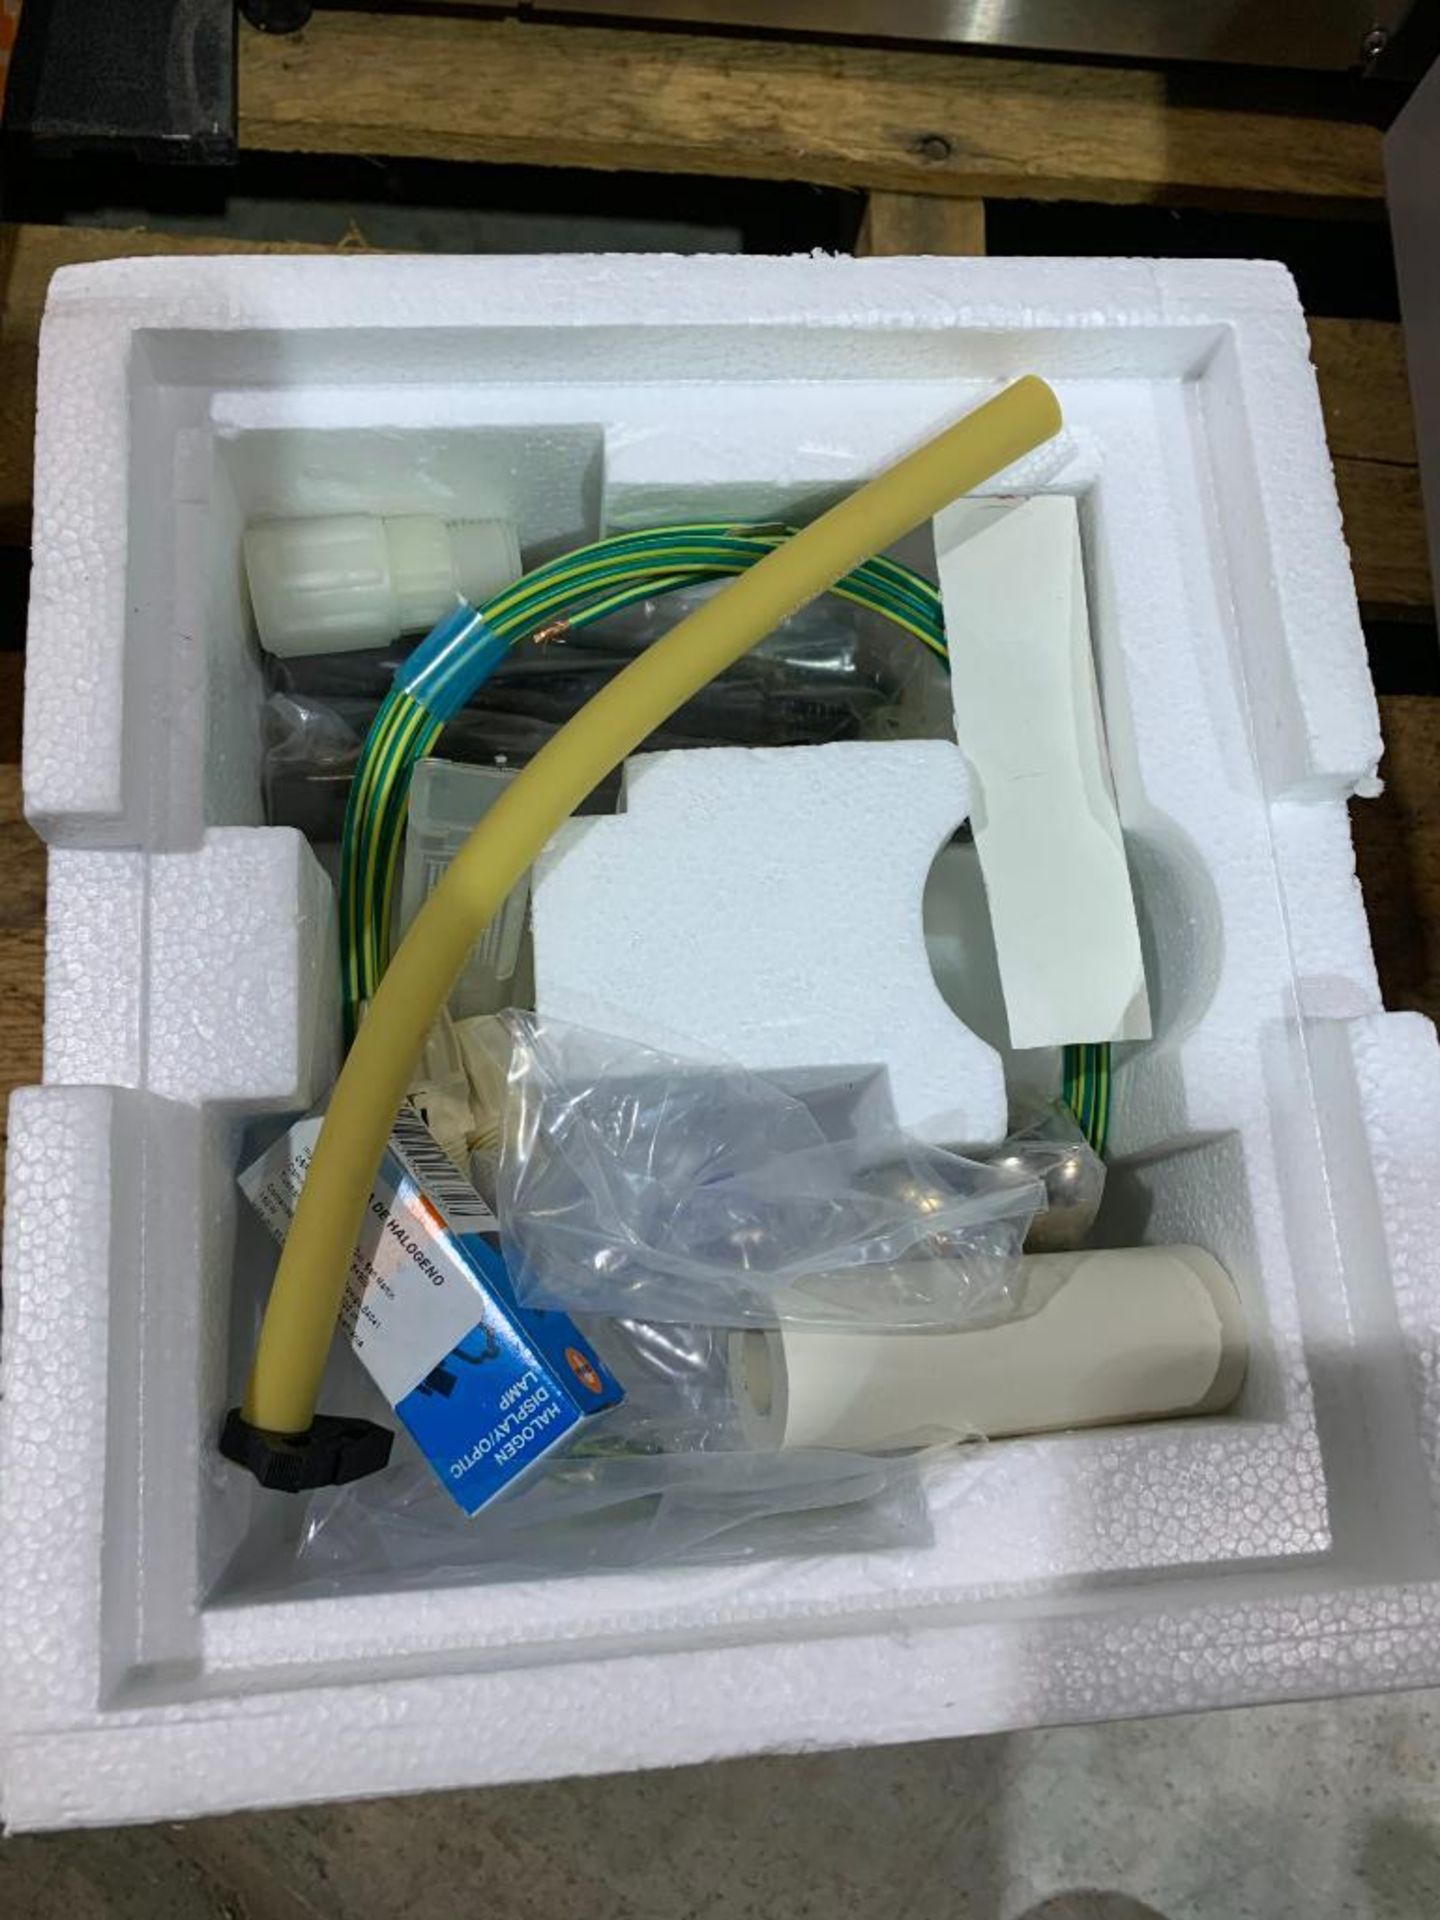 Mitutoyo optical lamp parts in box